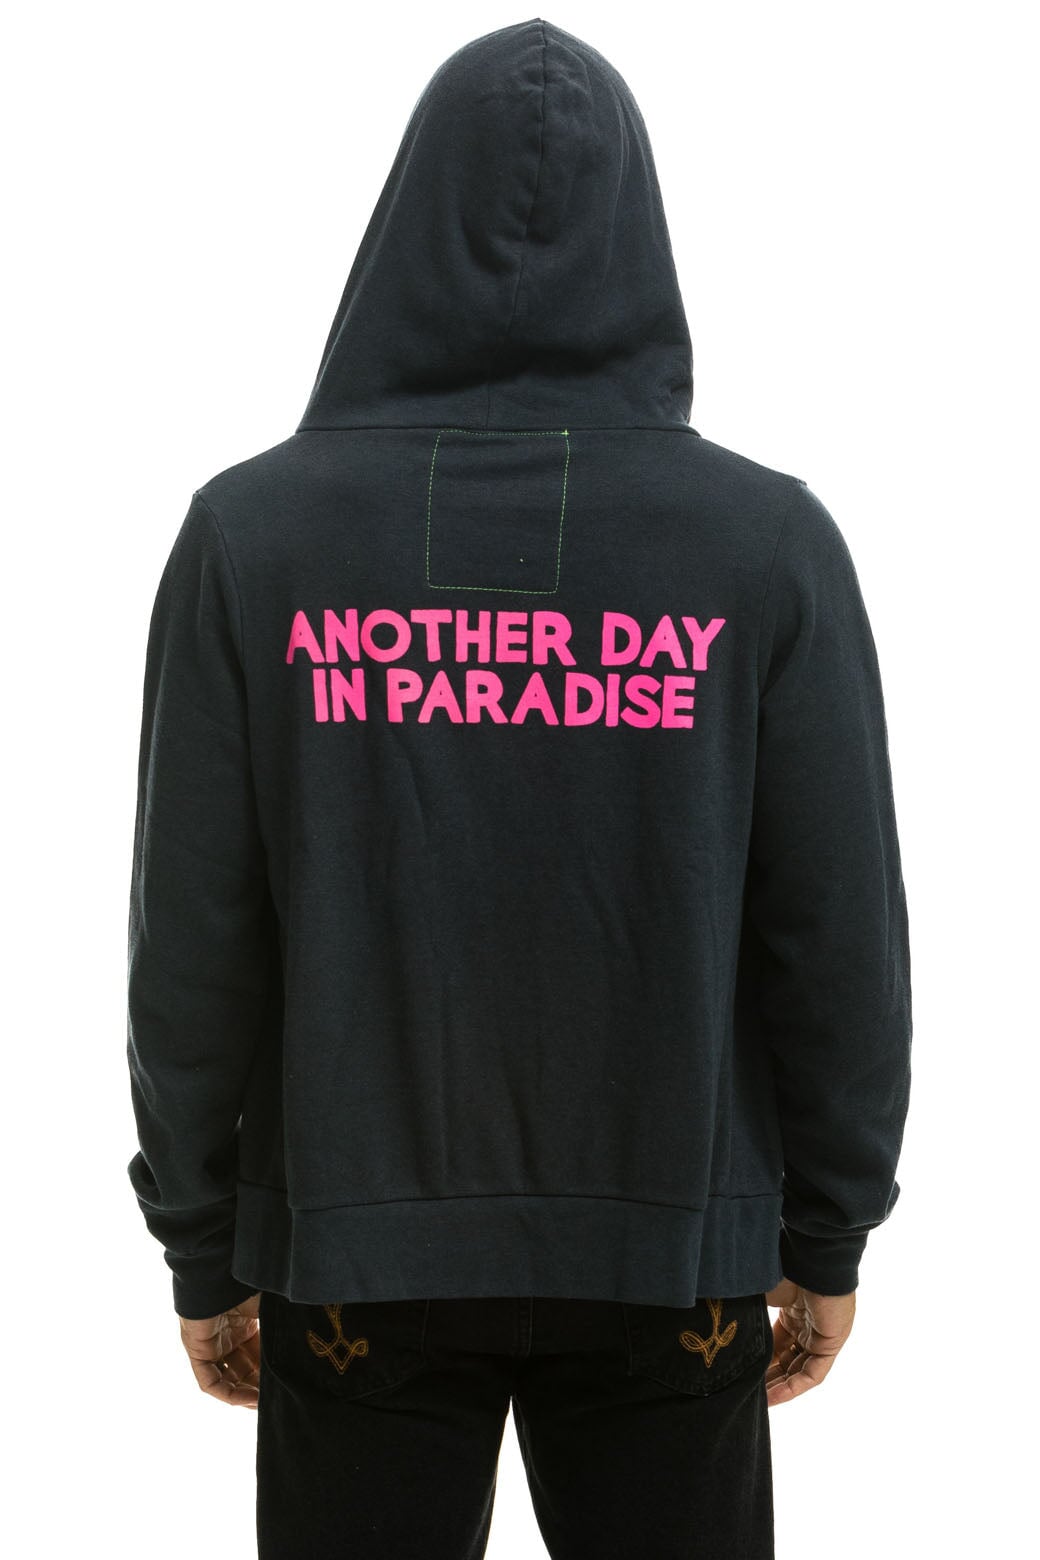 ANOTHER DAY IN PARADISE HOODIE - CHARCOAL // NEON PINK Hoodie Aviator Nation 